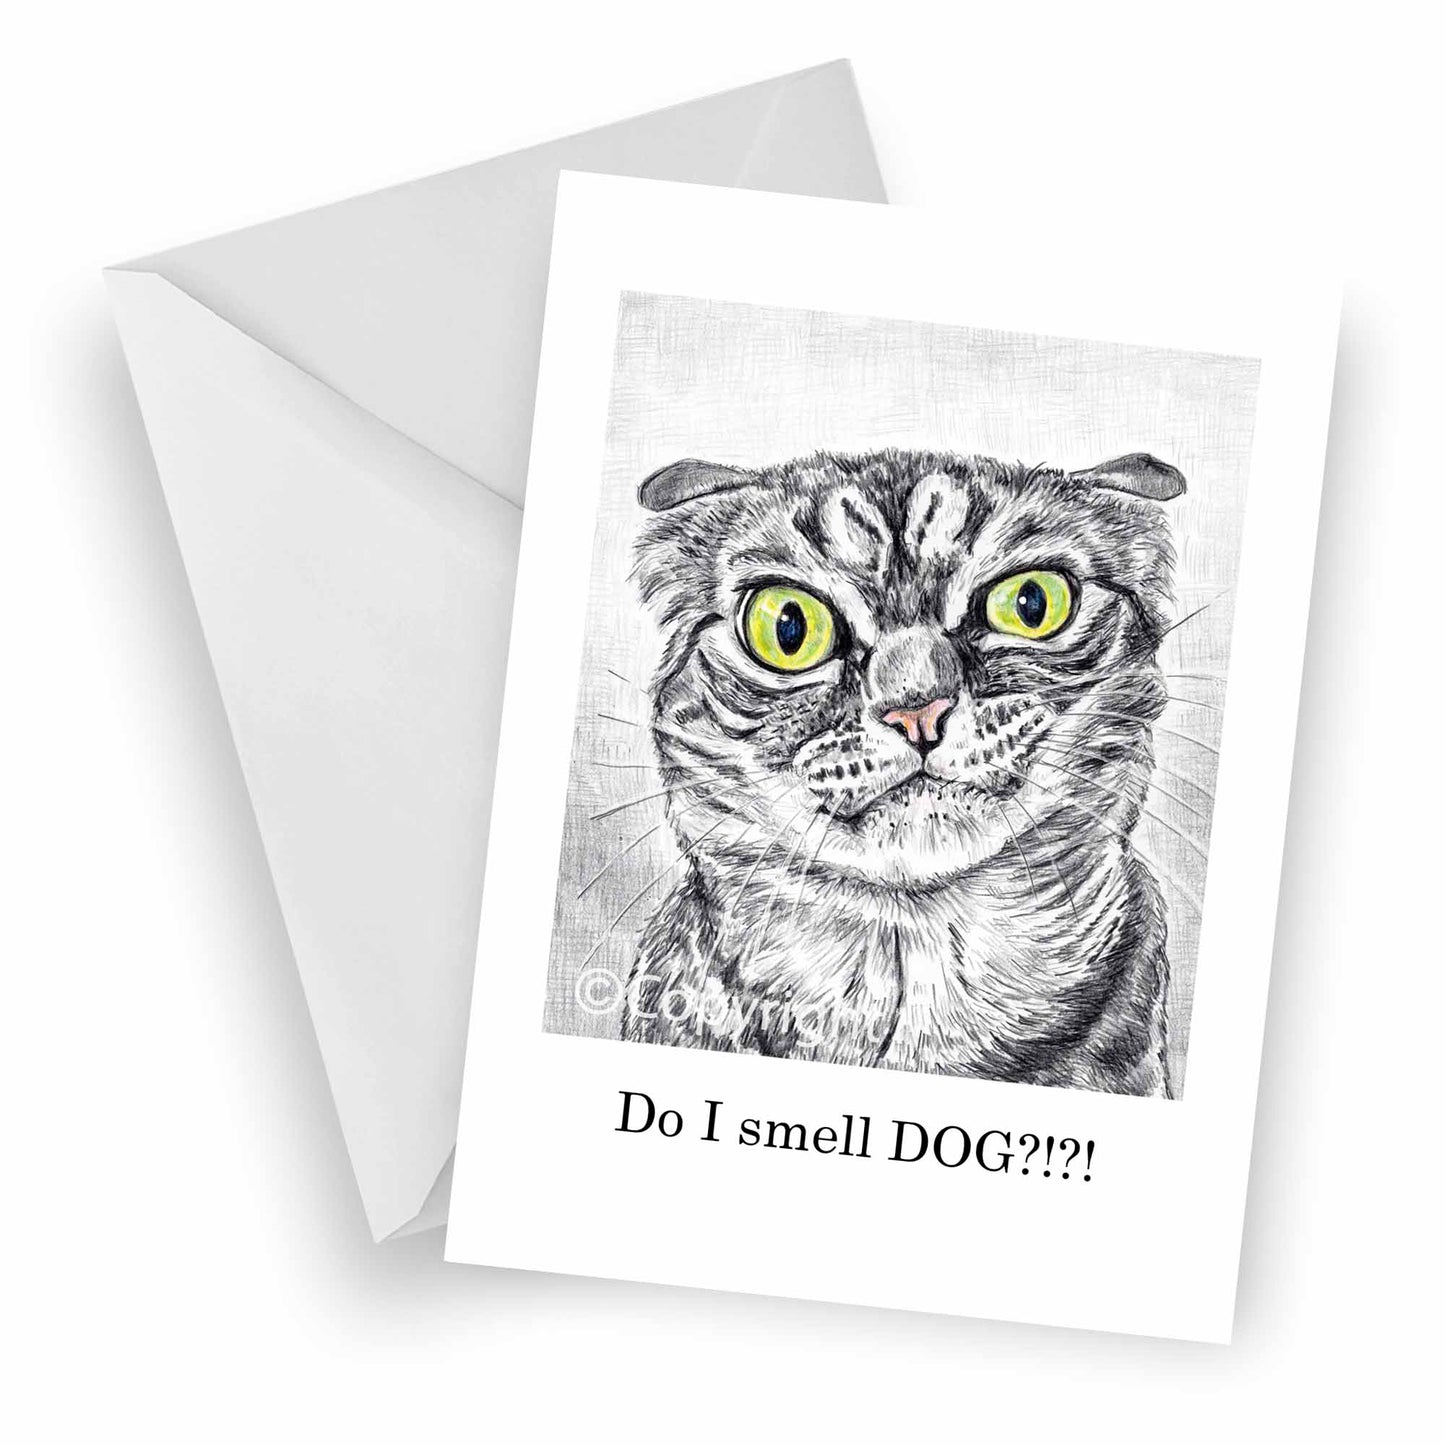 Greeting card featuring a crayon wax pastel drawing of a disgruntled tabby cat. Art by Deidre Wicks